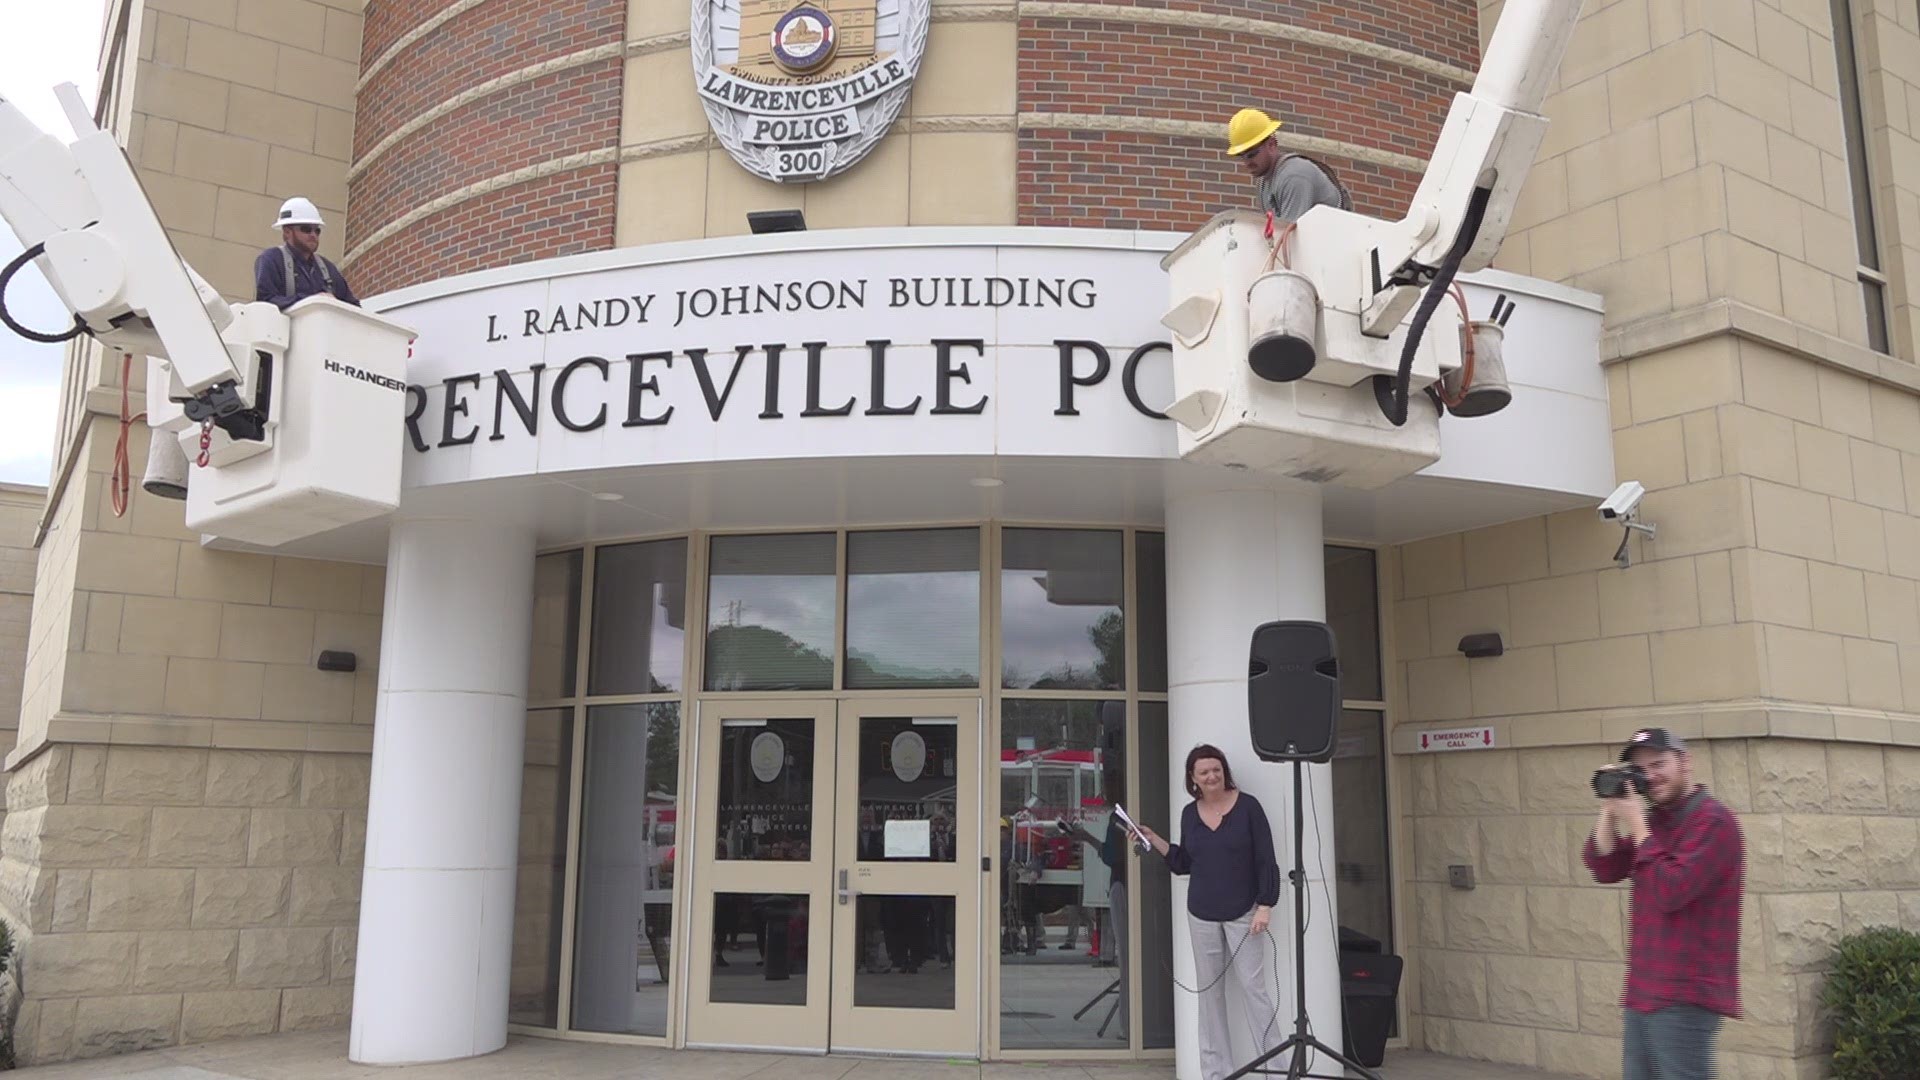 L. Randy Johnson was one of the longest-serving police chiefs in Lawrenceville. Now, the headquarters built during his tenure honors him.